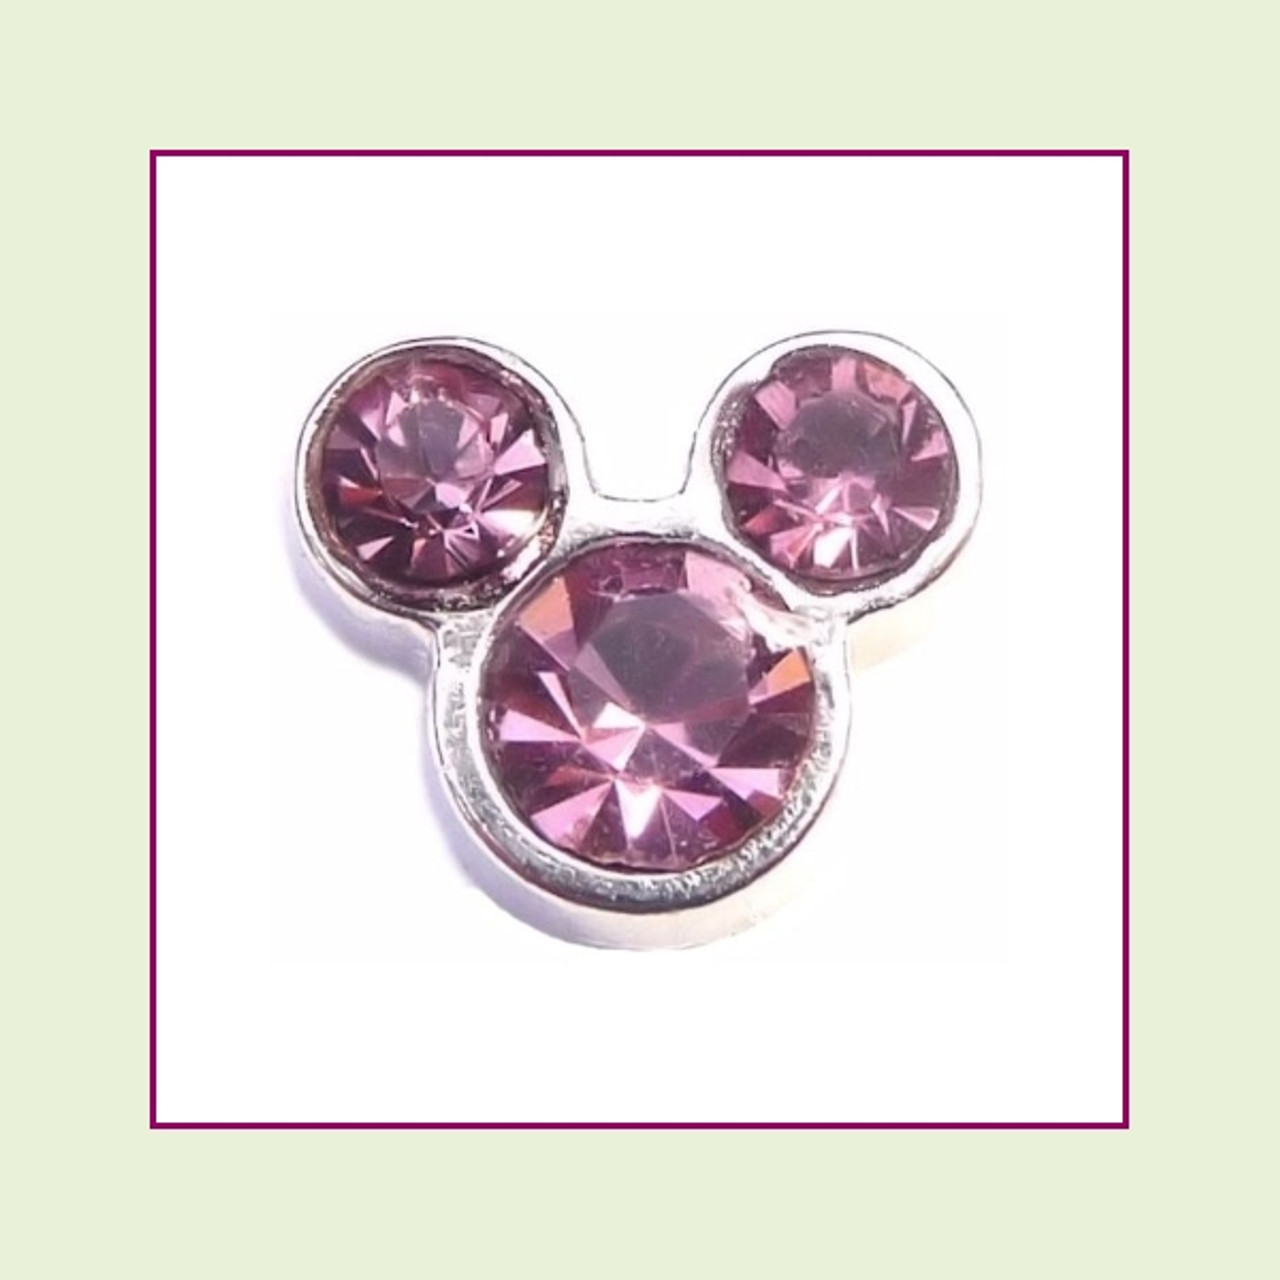 MM06 - June Mouse Ears Birthstone Silver Floating Charm